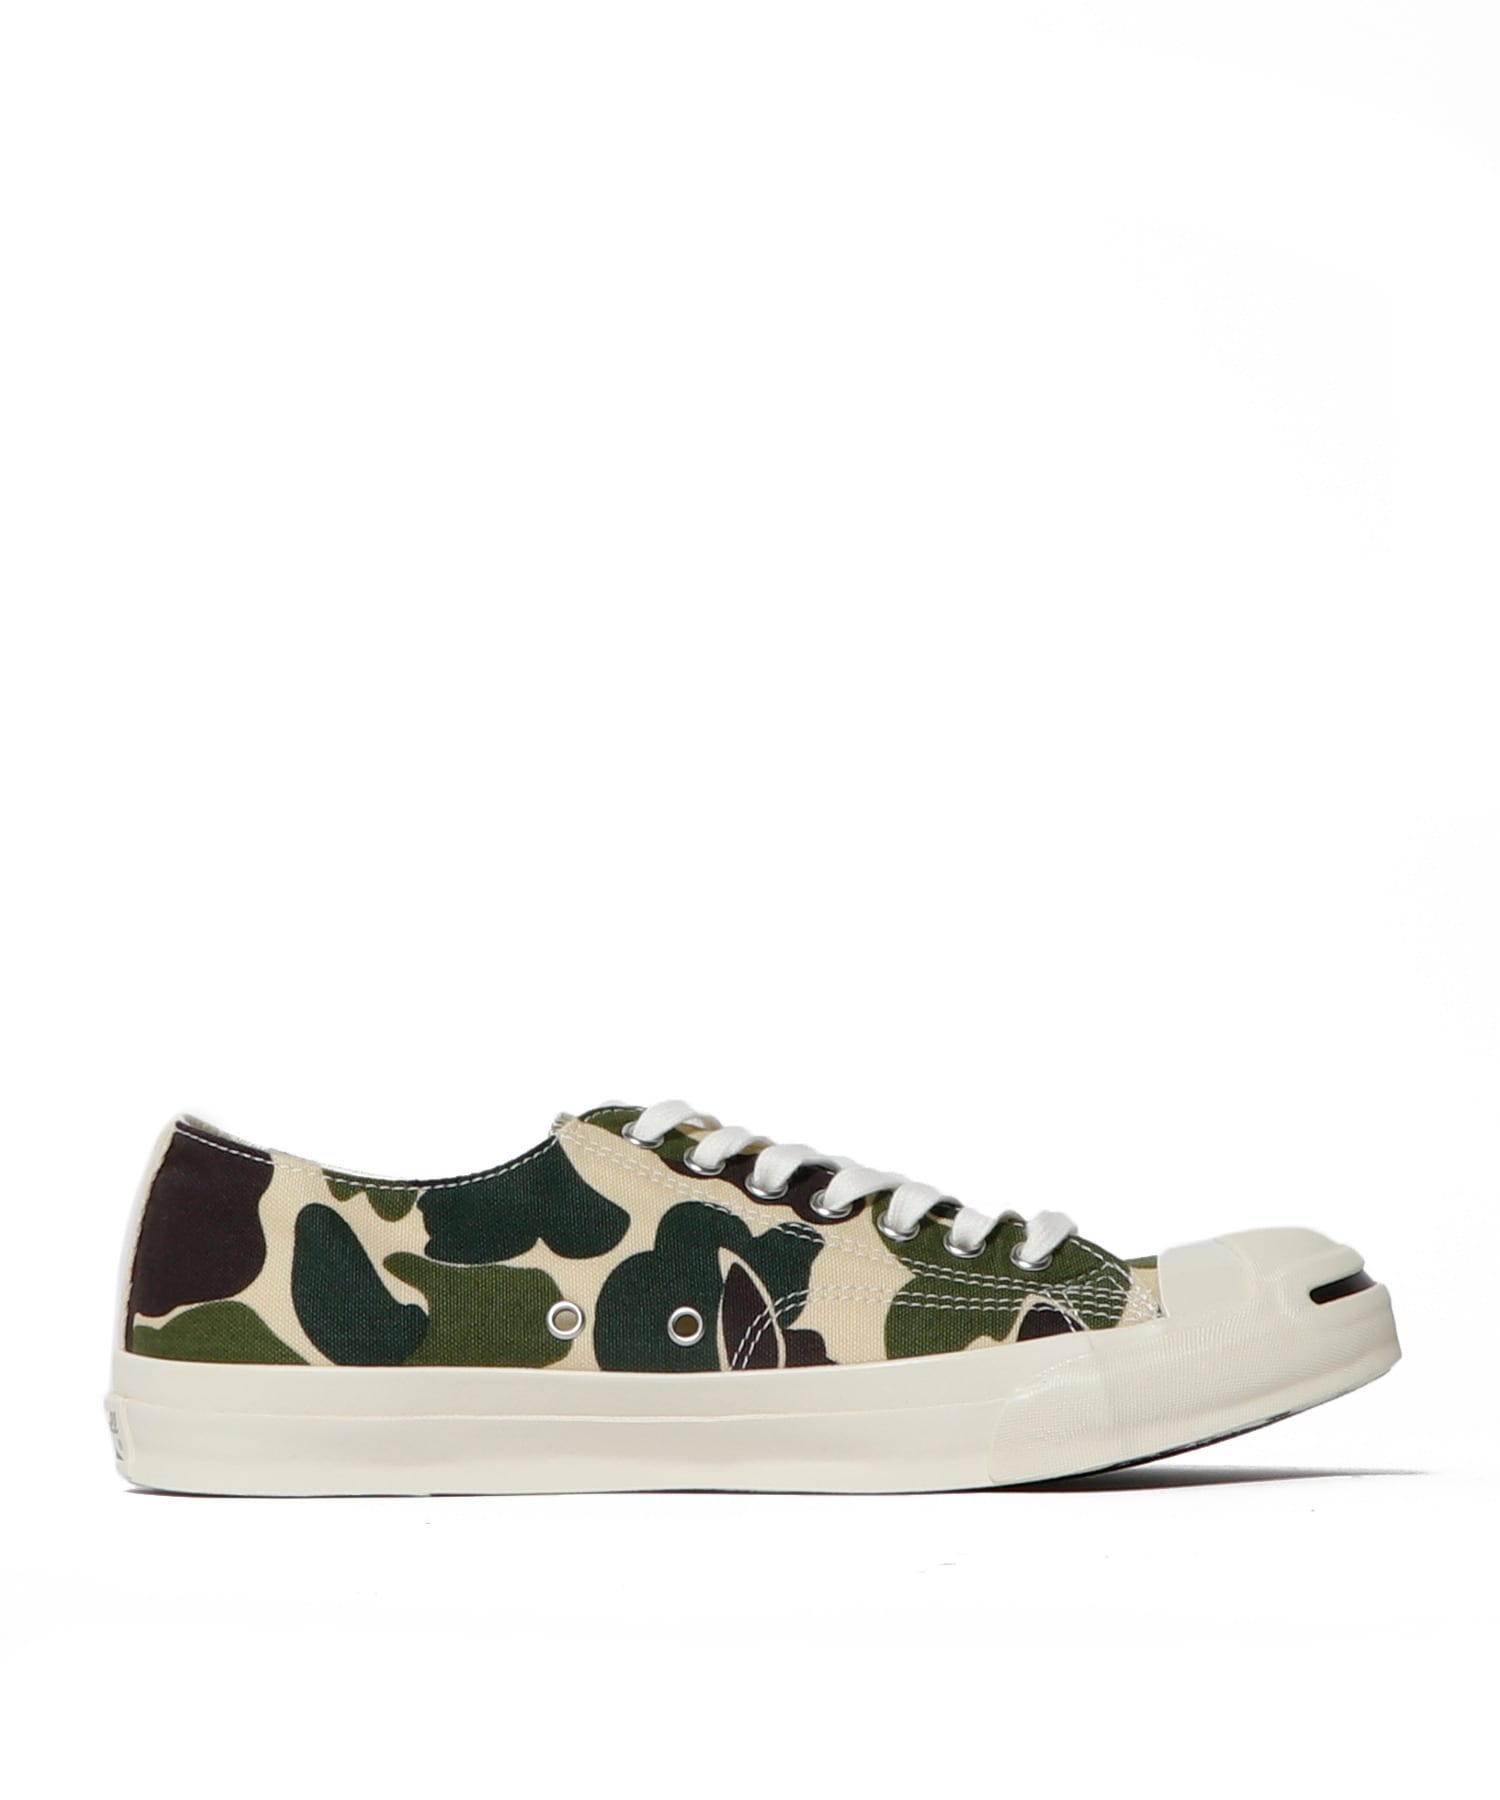 JACK PURCELL US 83CAMO 詳細画像 オリーブ 2